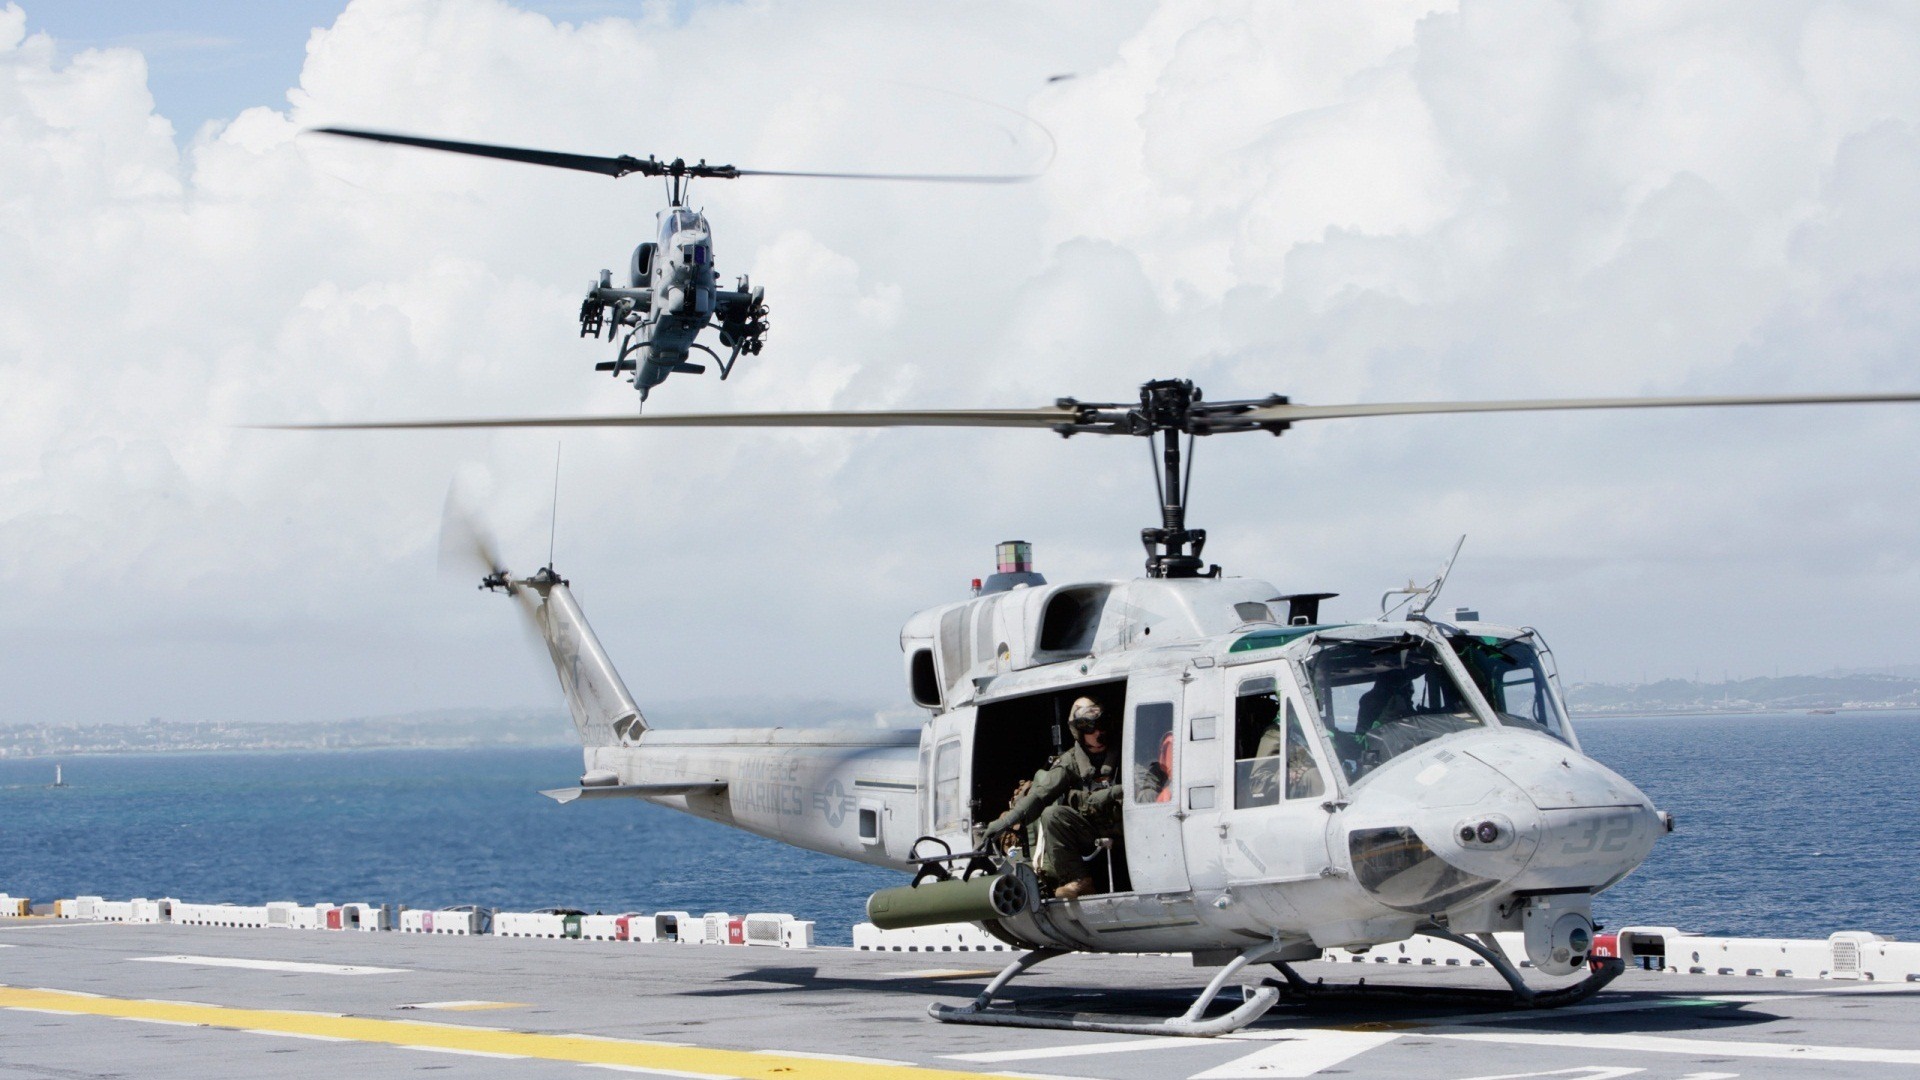 Military helicopters HD wallpapers #16 - 1920x1080